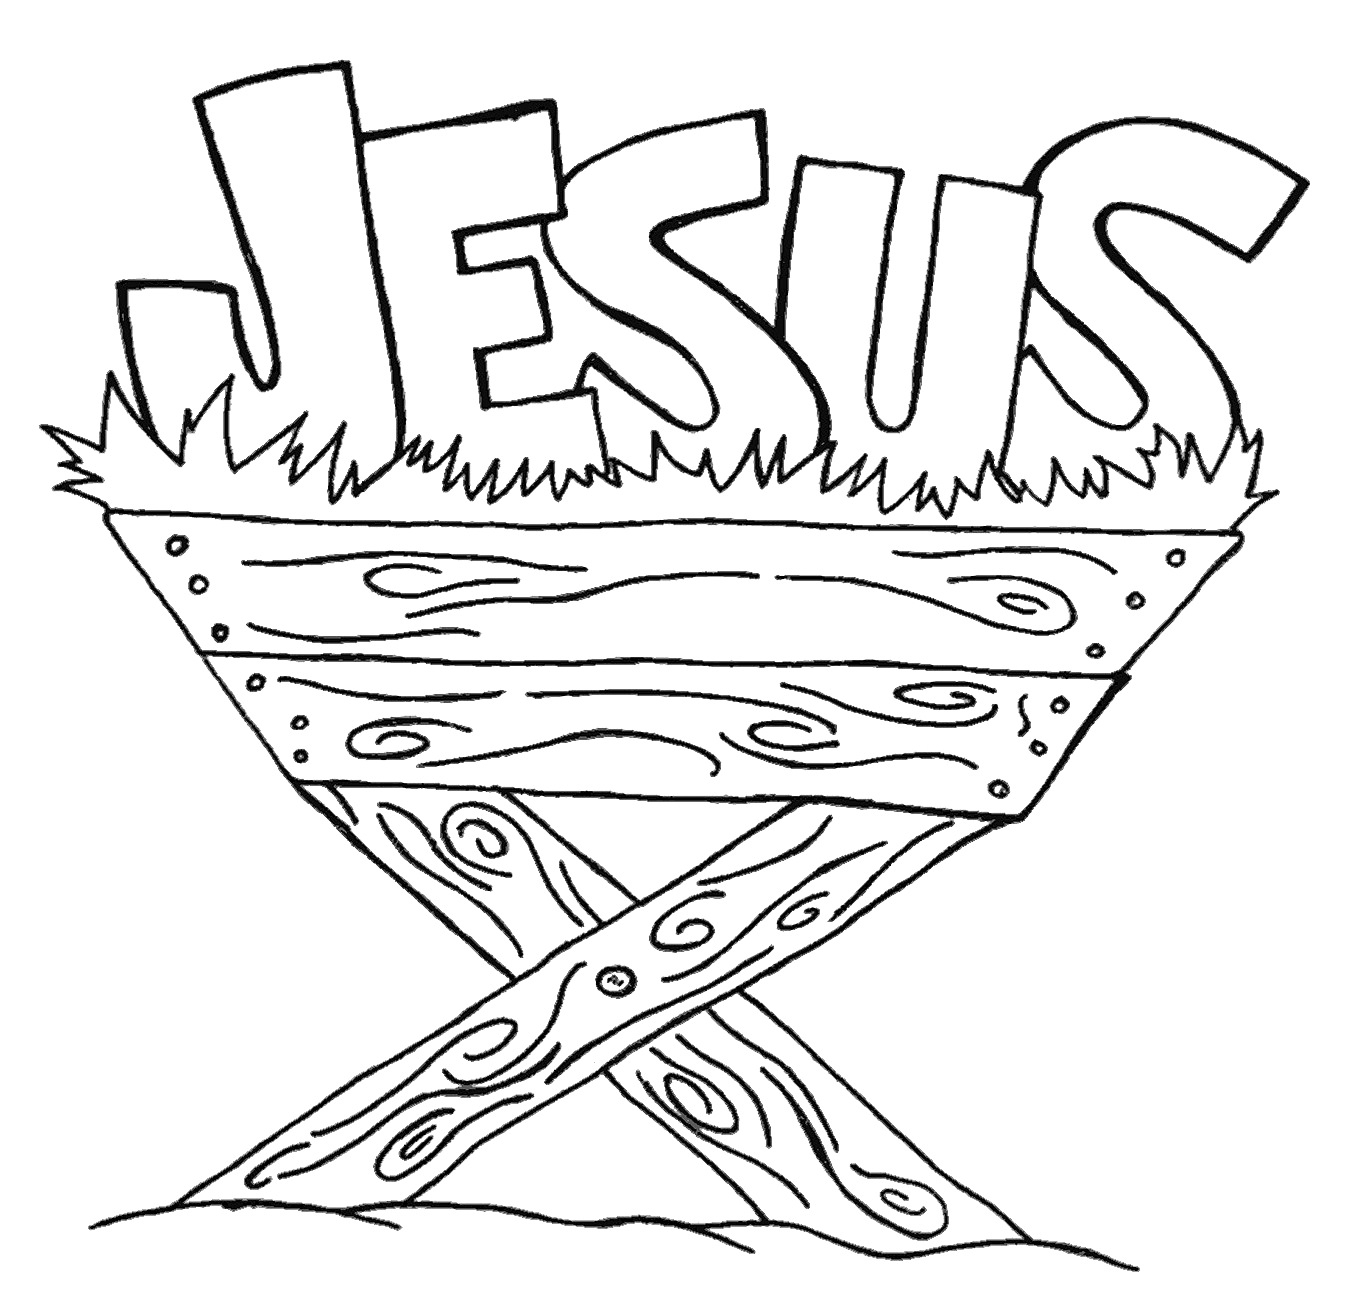 Names Of Jesus Coloring Page Free Christian Coloring Pages For Kids And Young Children Level 1